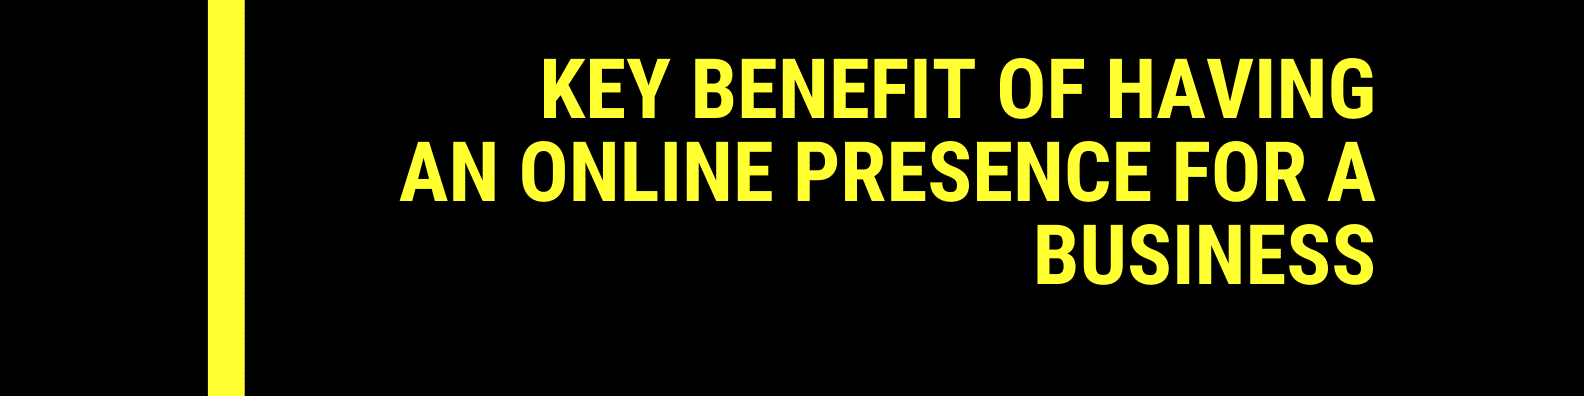 Key benefit of having an online presence for a business